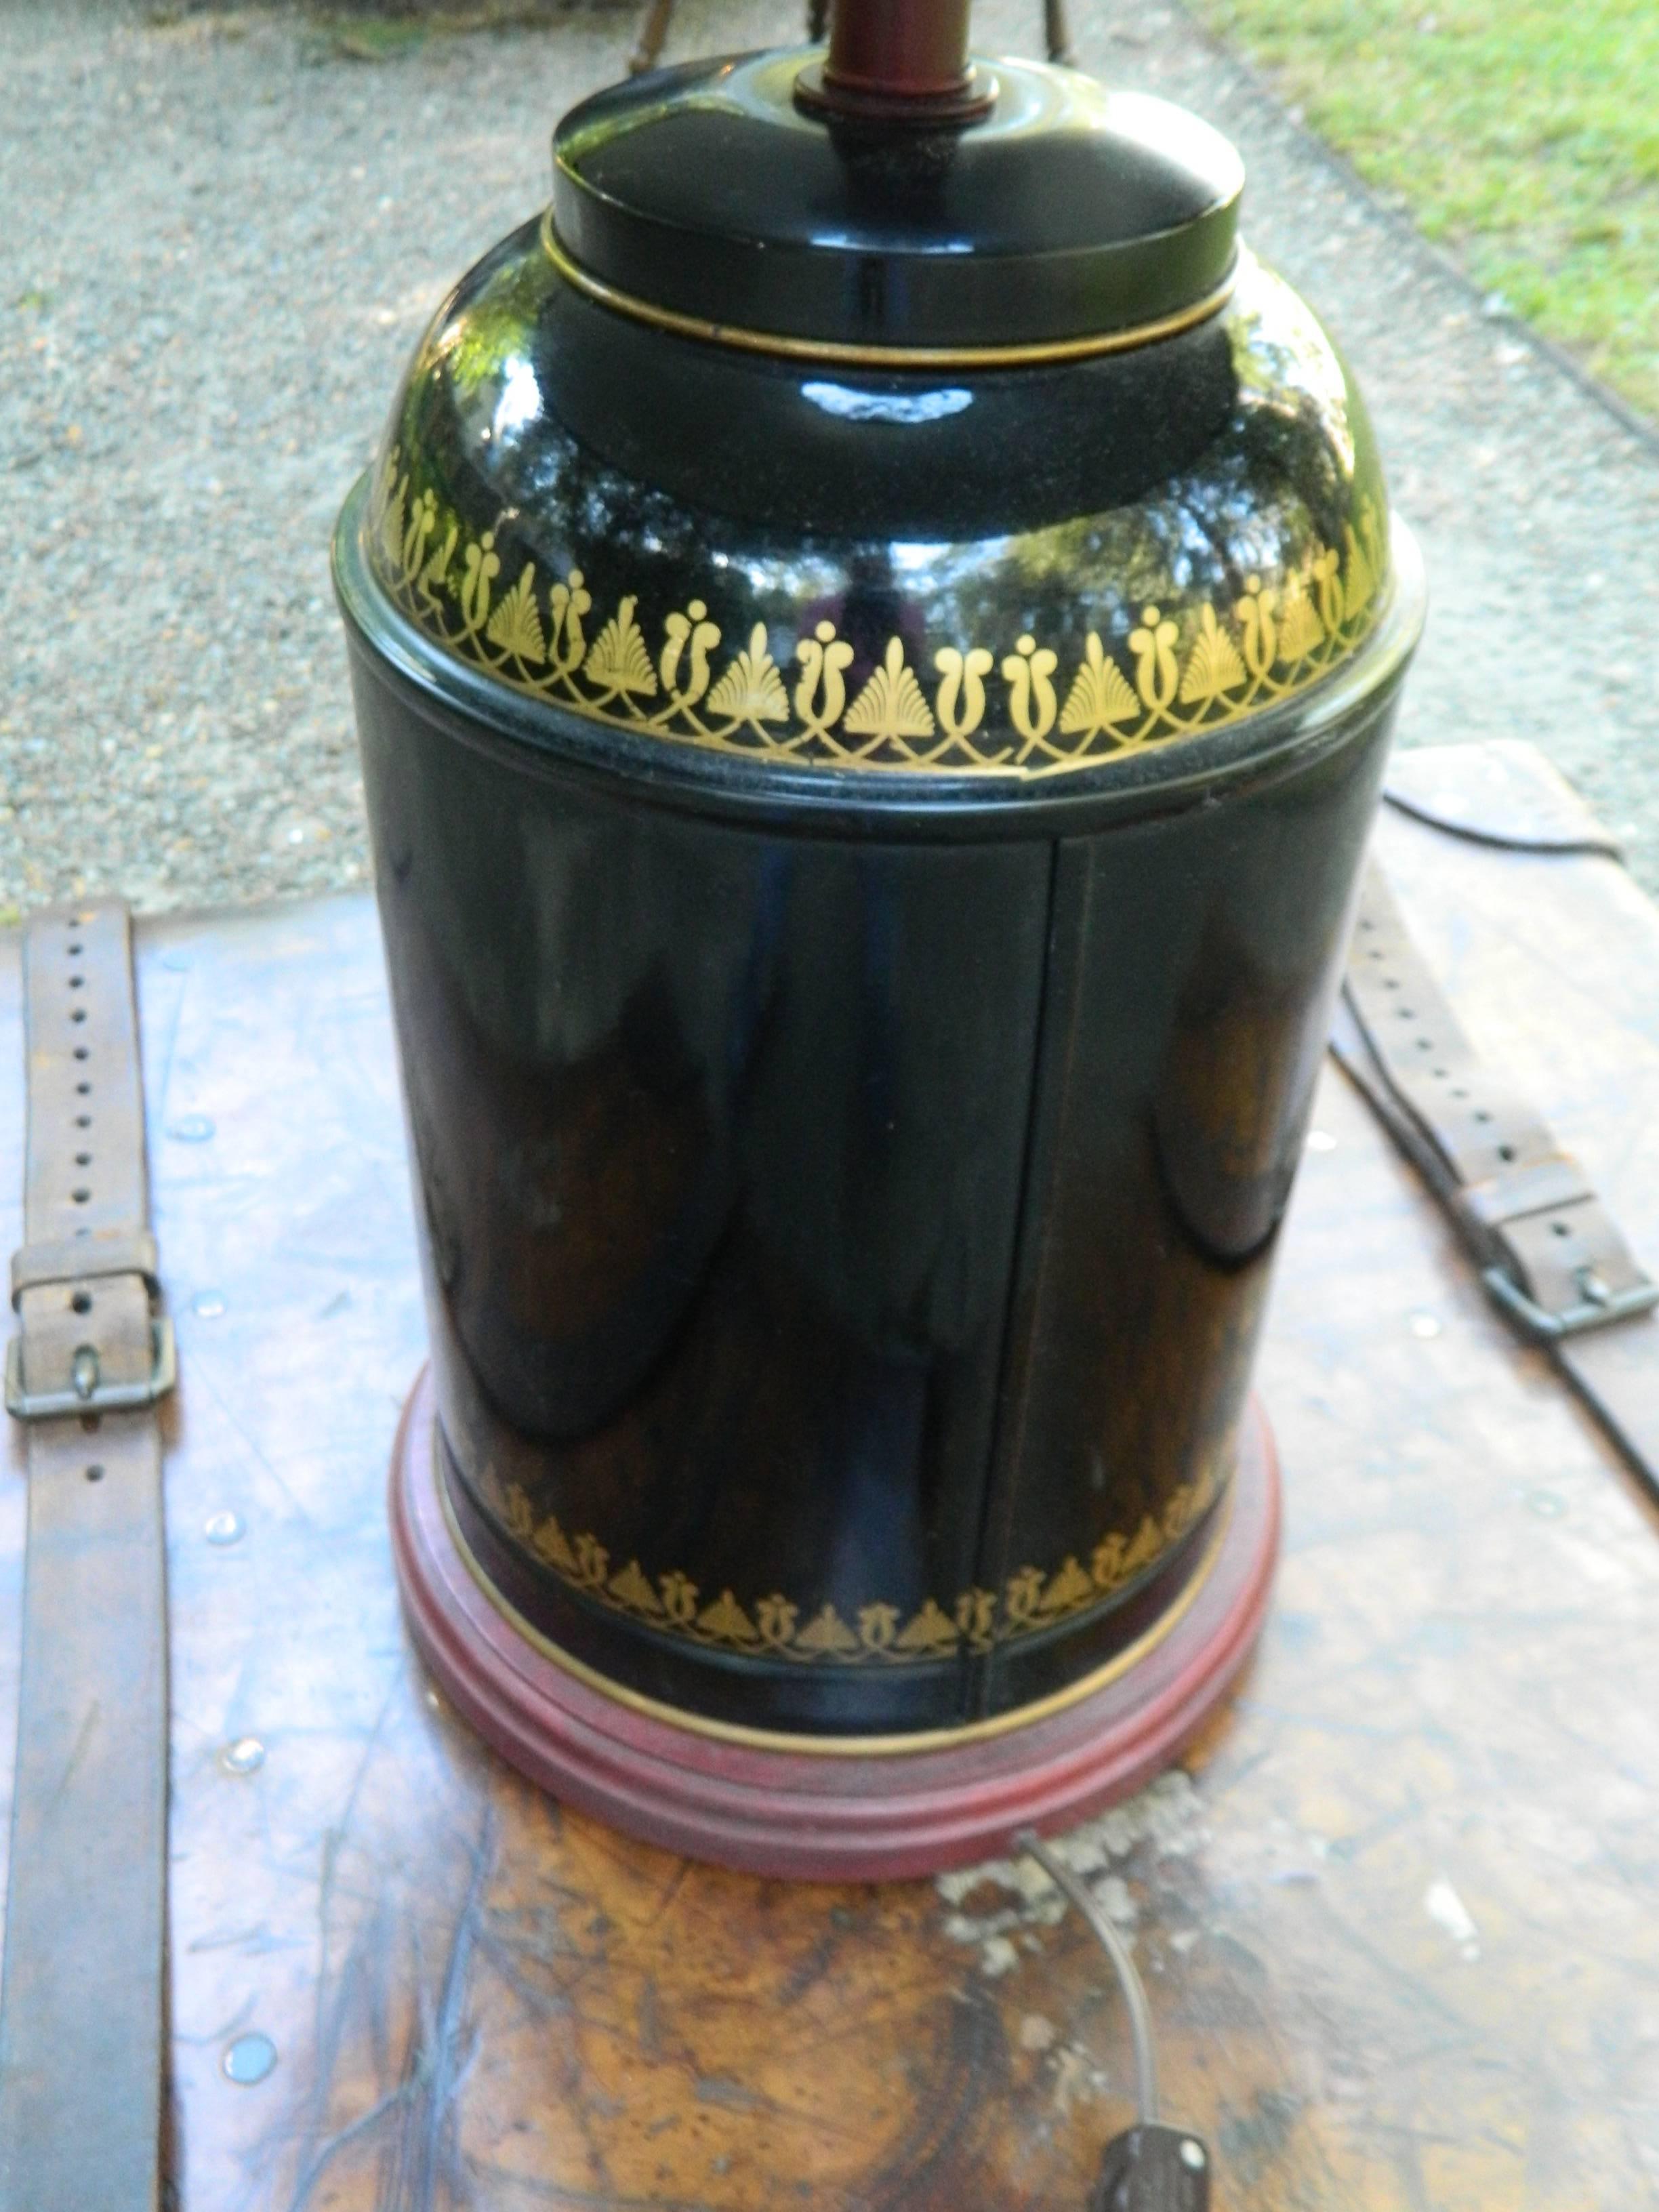 Pair of black tole canisters adapted as lamps with a coat of arms design, 20th century.
 